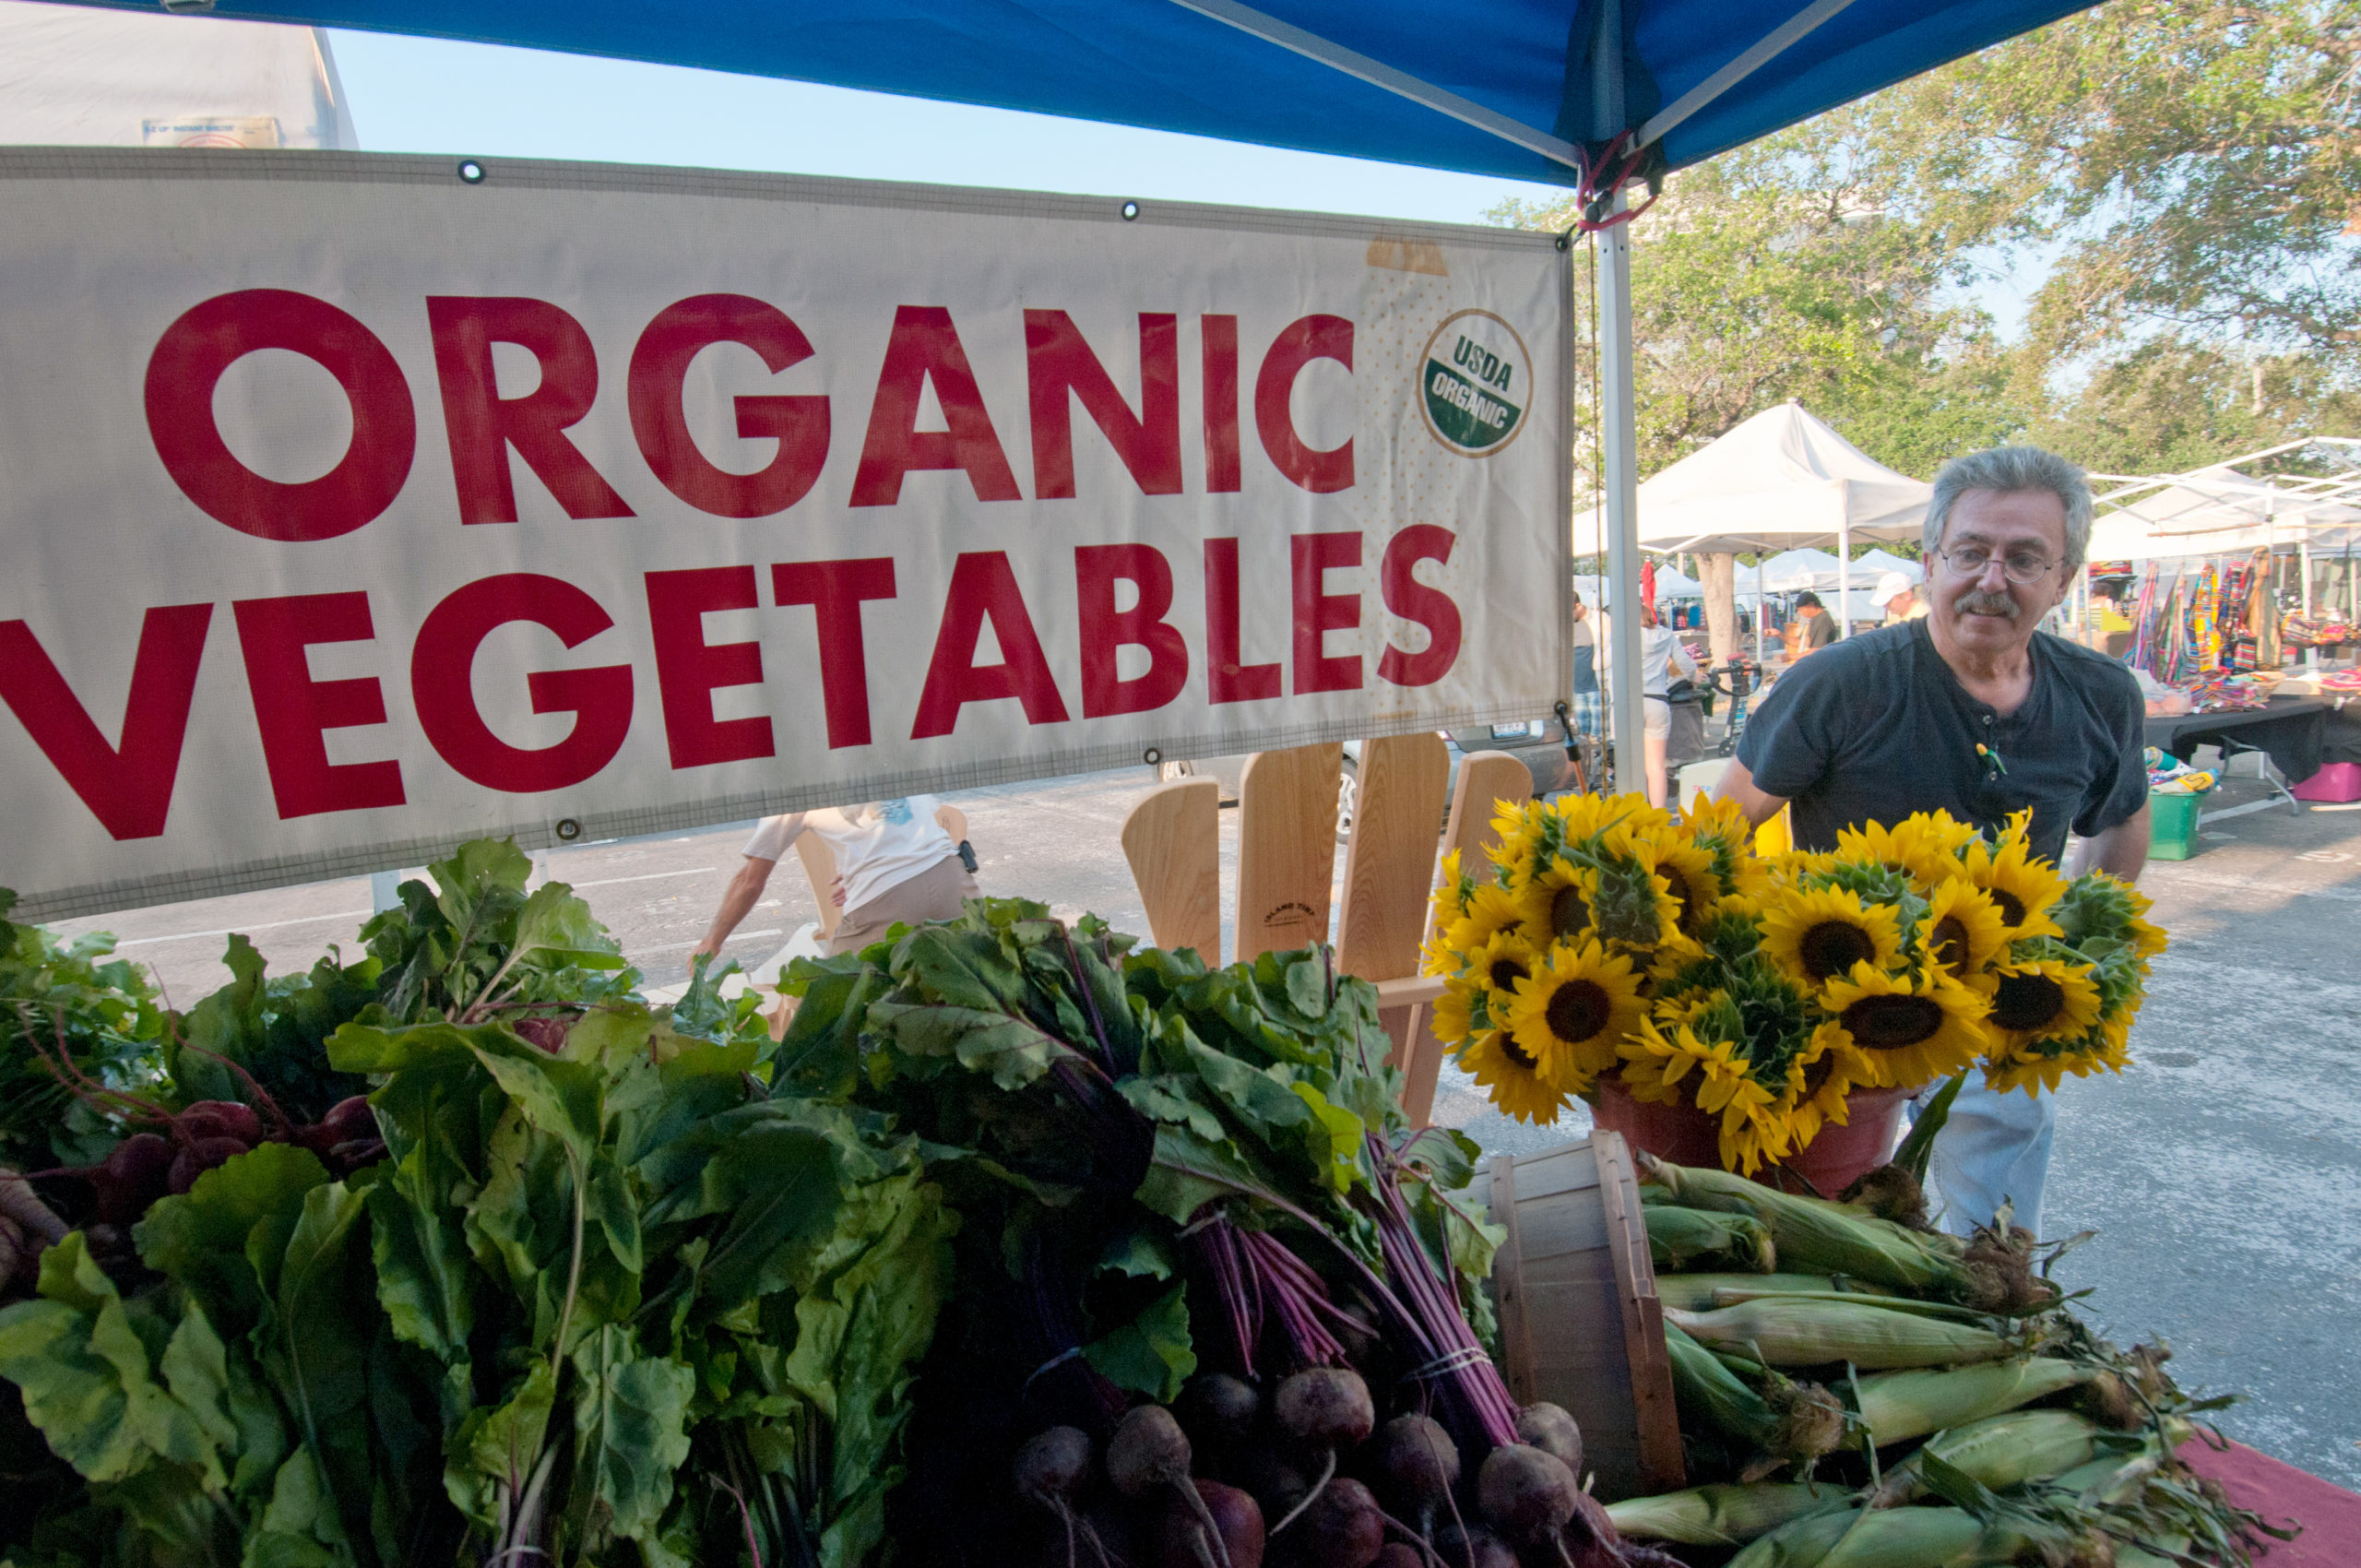 $300 Million Invested into New Organic Transition Initiative